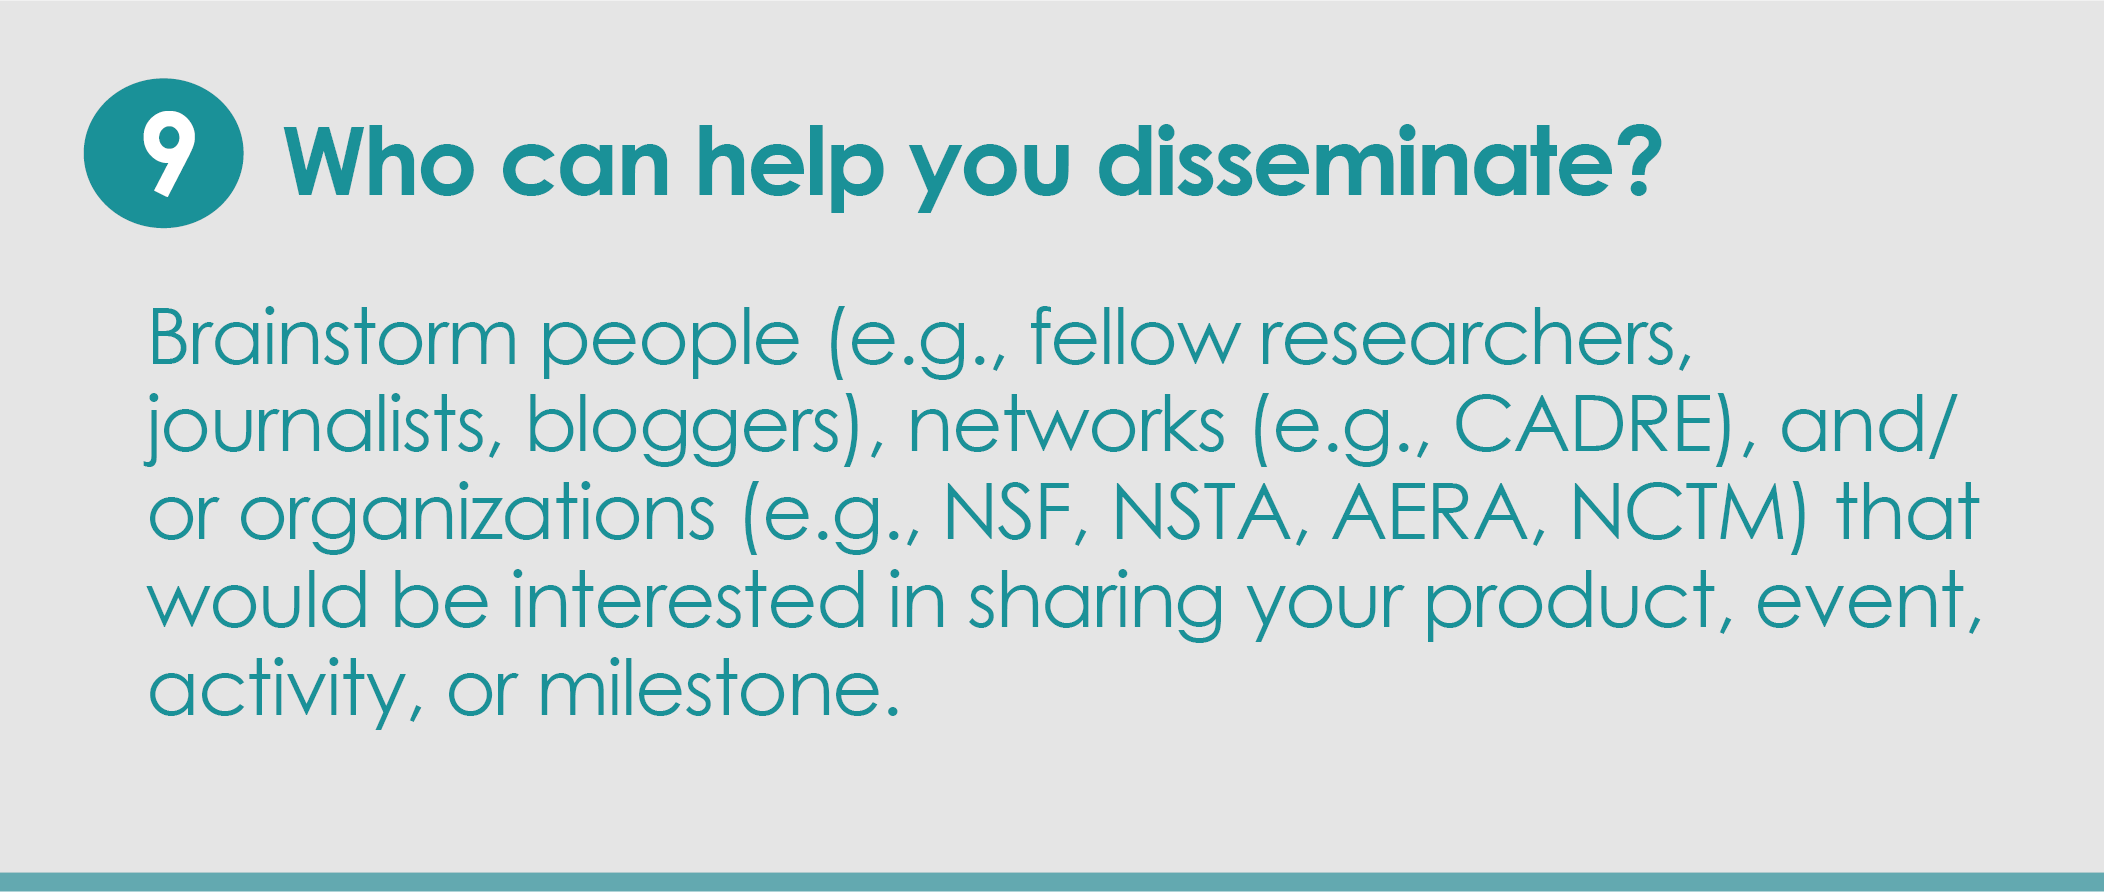 Step 9: Who can help you disseminate? Brainstorm people (e.g., fellow researchers, journalists, bloggers), networks (e.g., CADRE), and/or organizations (e.g., NSF, NSTA, AERA, NCTM) that would be interested in sharing your product, event, activity or milestone.